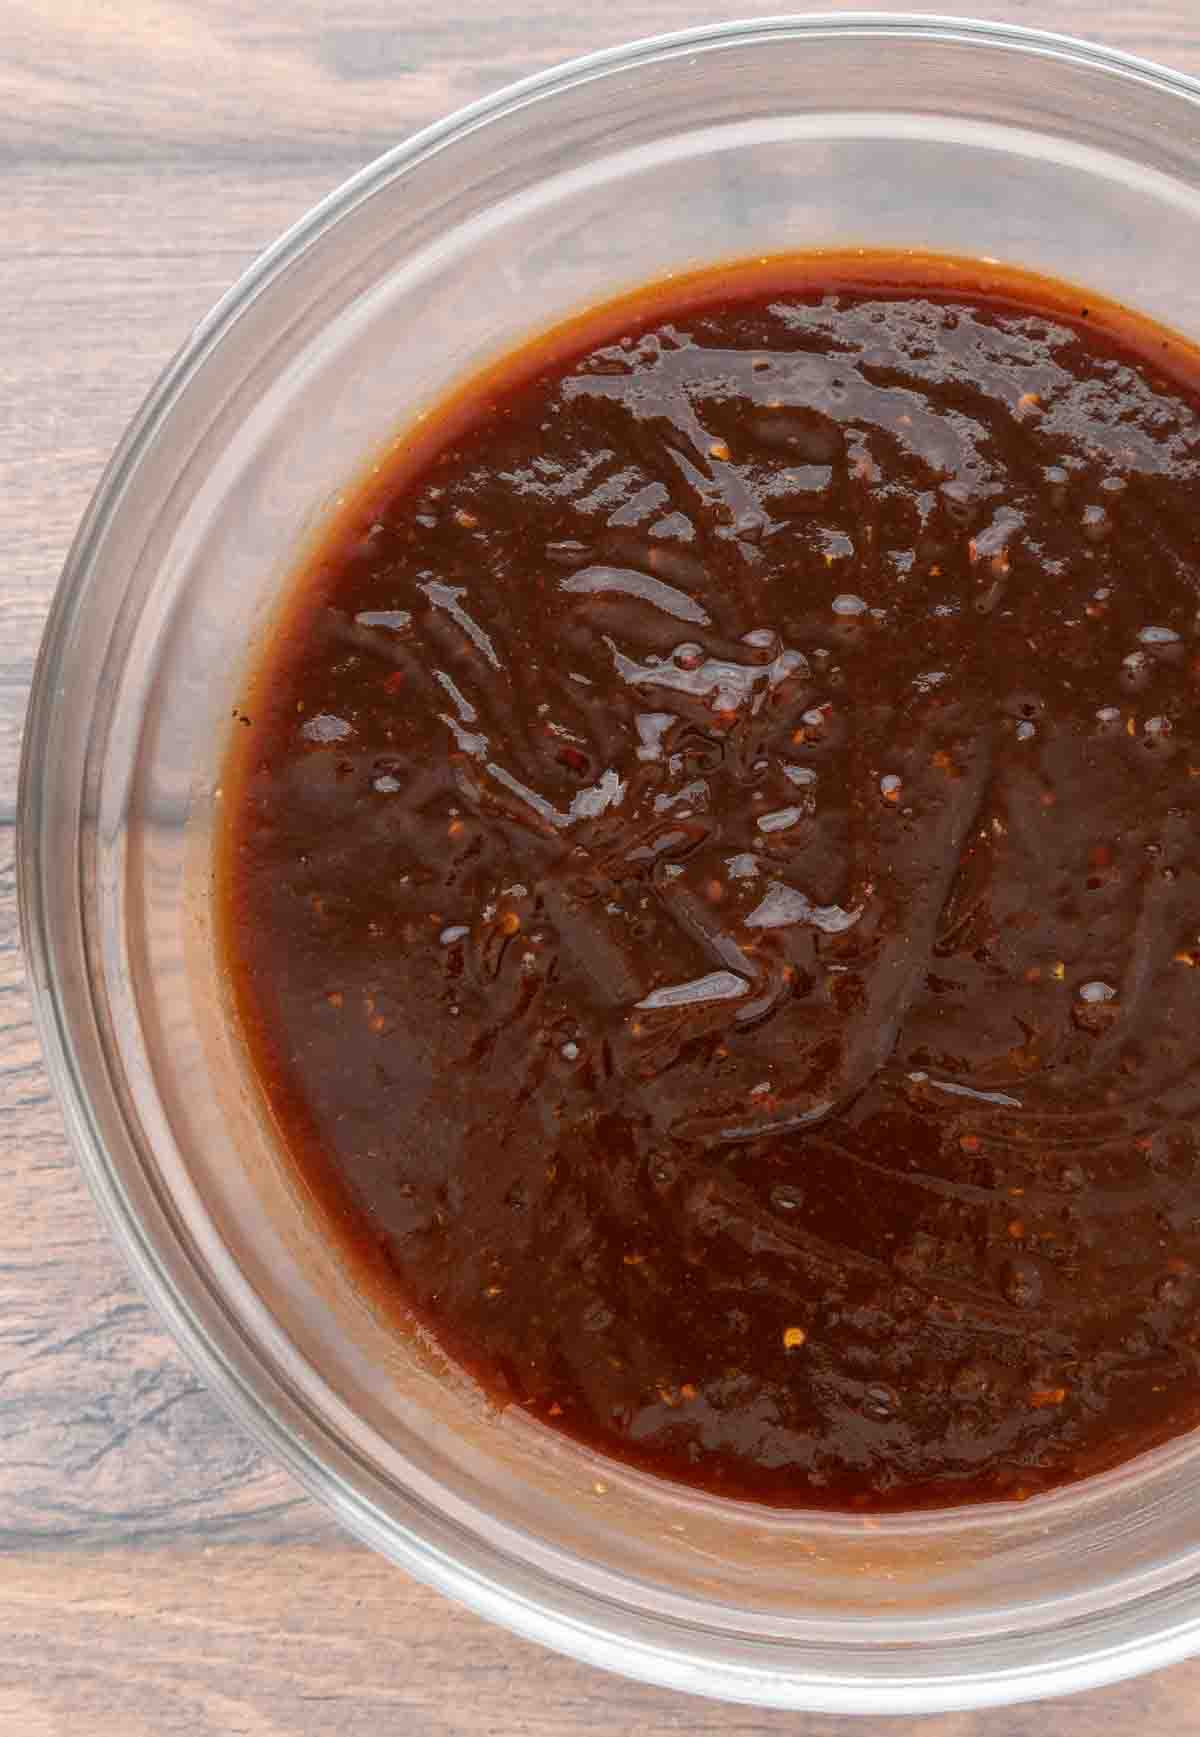 semi-homemade barbecue sauce in a glass bowl.